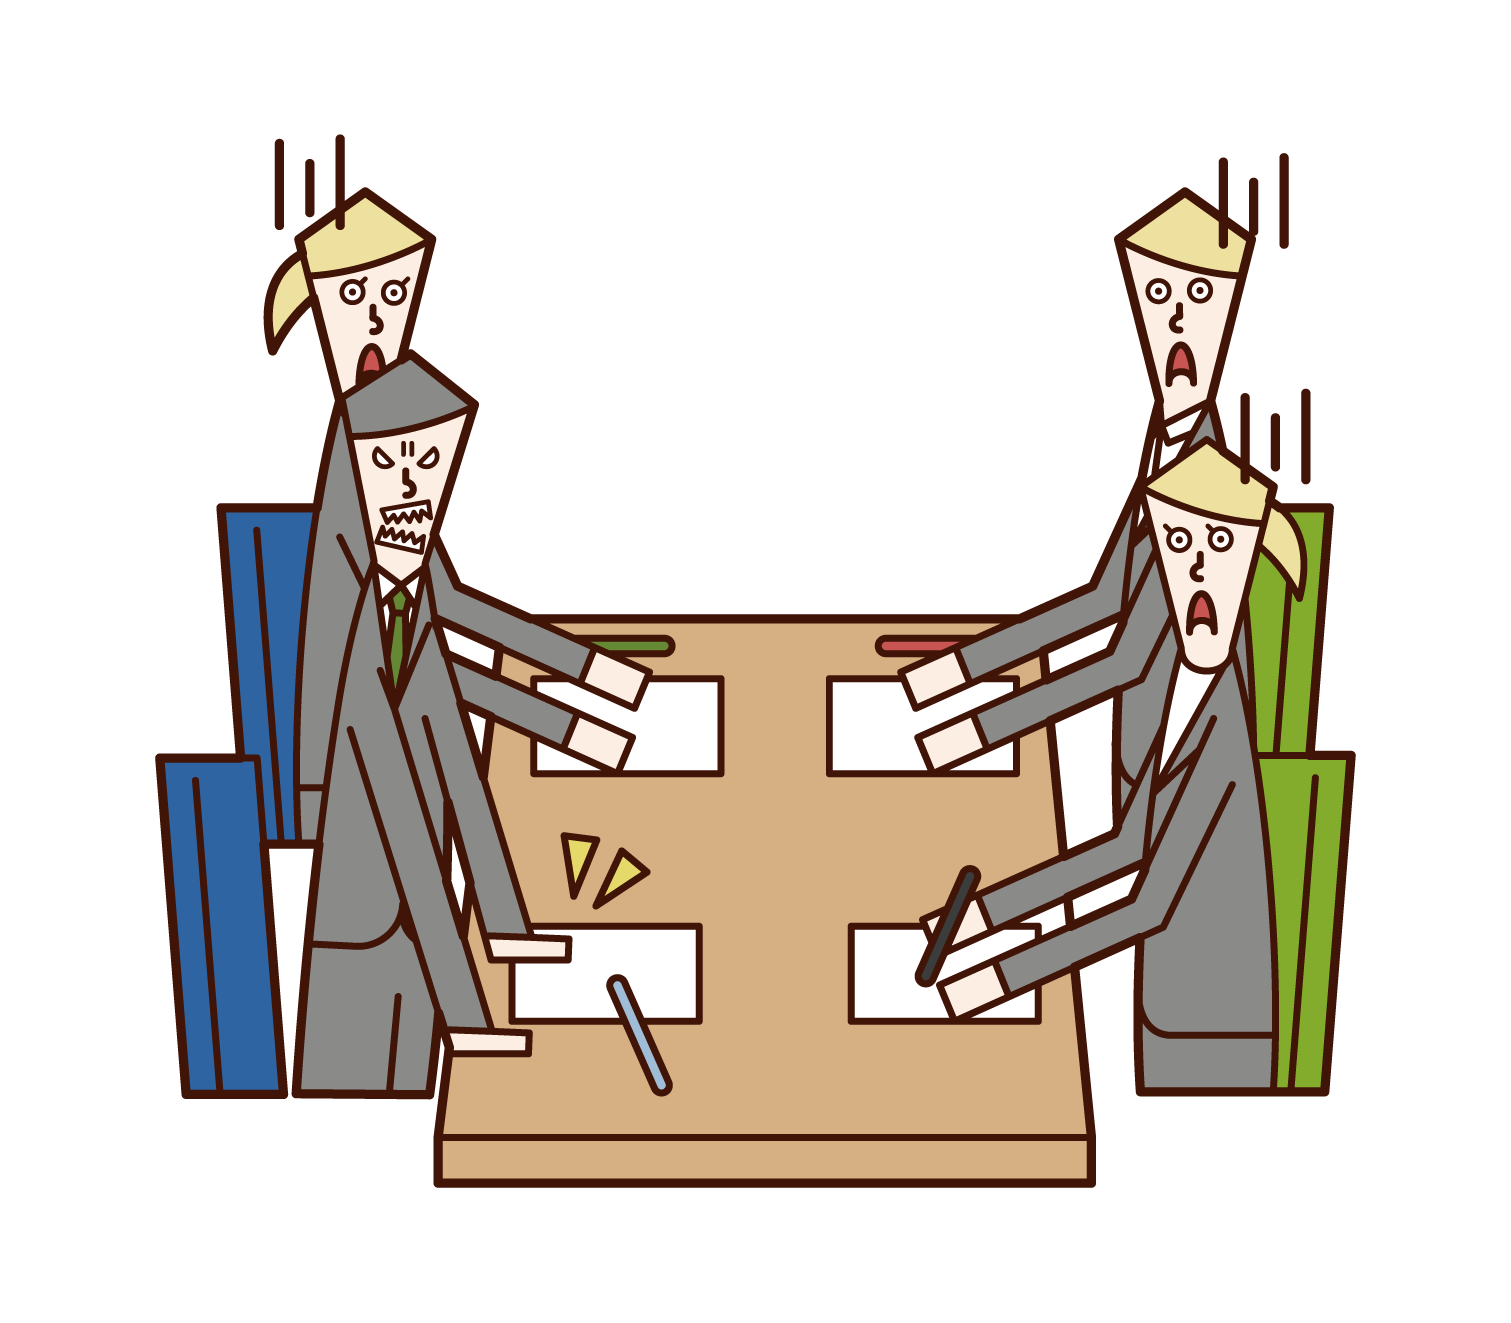 Illustration of a man angry at a meeting